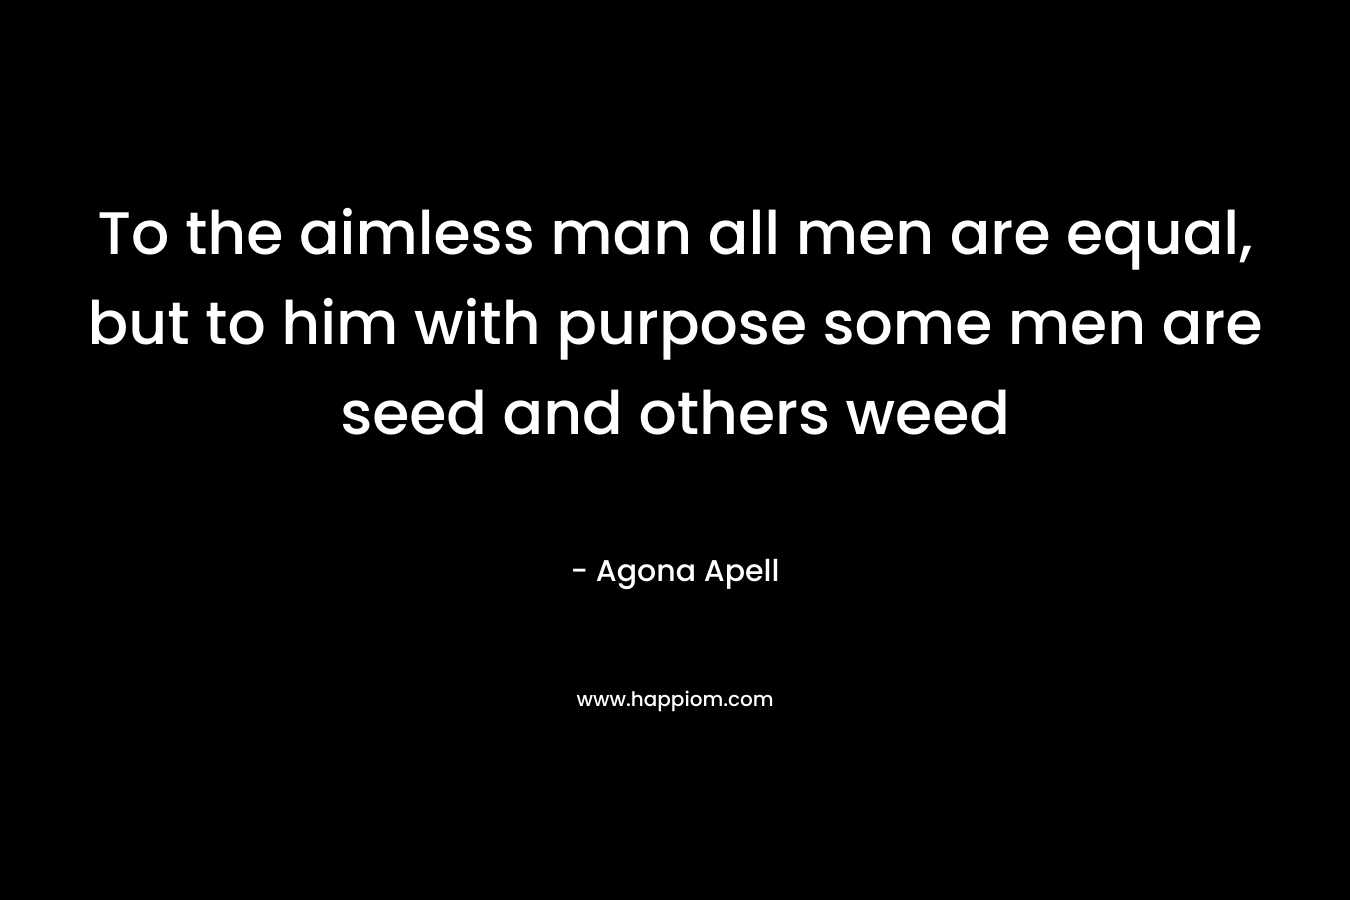 To the aimless man all men are equal, but to him with purpose some men are seed and others weed – Agona Apell